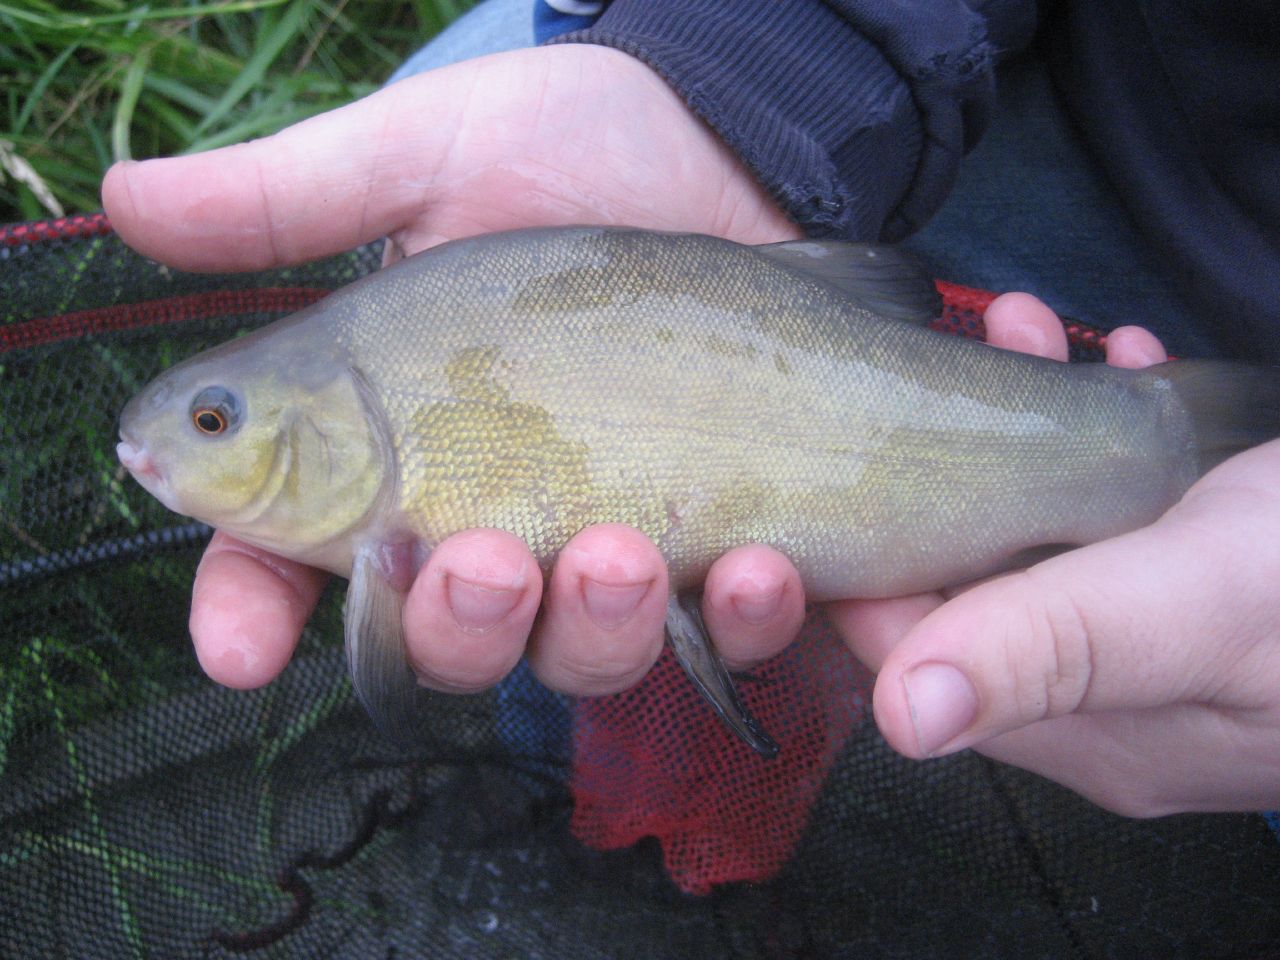 there is a large carp fish in someones hand